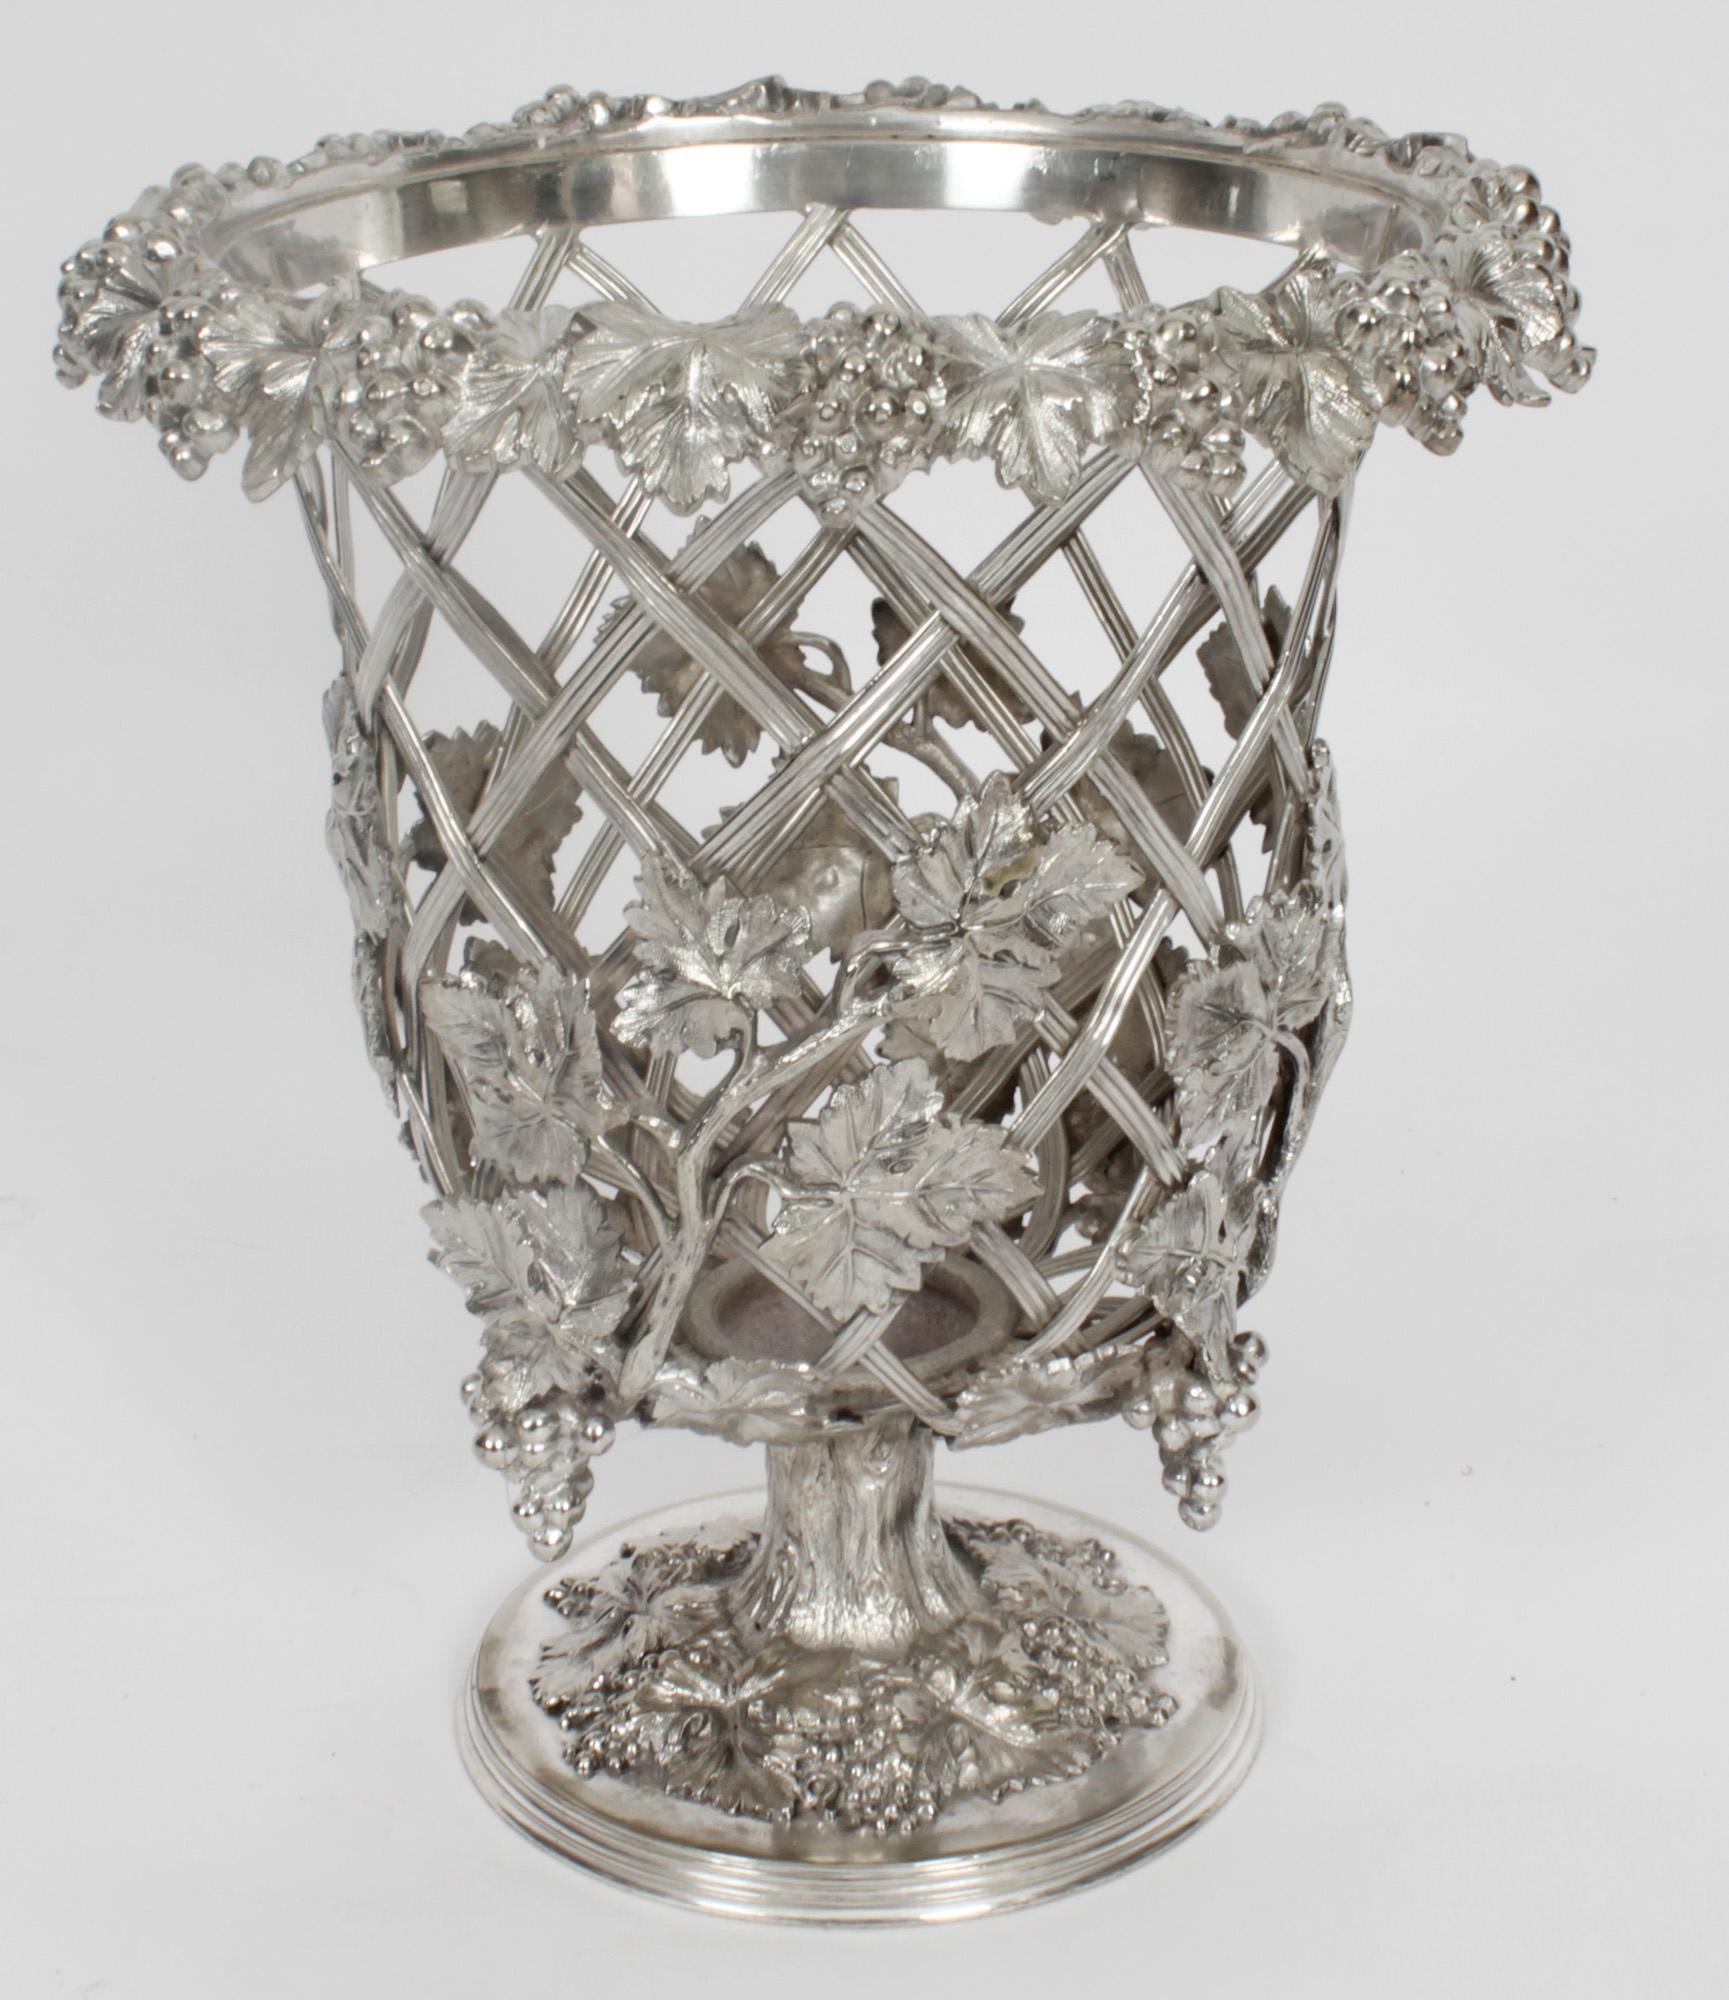 This is a wonderful, rare and highly decorative antique English Old Sheffield Plate Regency wine cooler of campana form, Circa 1820 in date.
 
It is embellished with applied vine leaf decoration over a trellis frame, and is raised on a circular